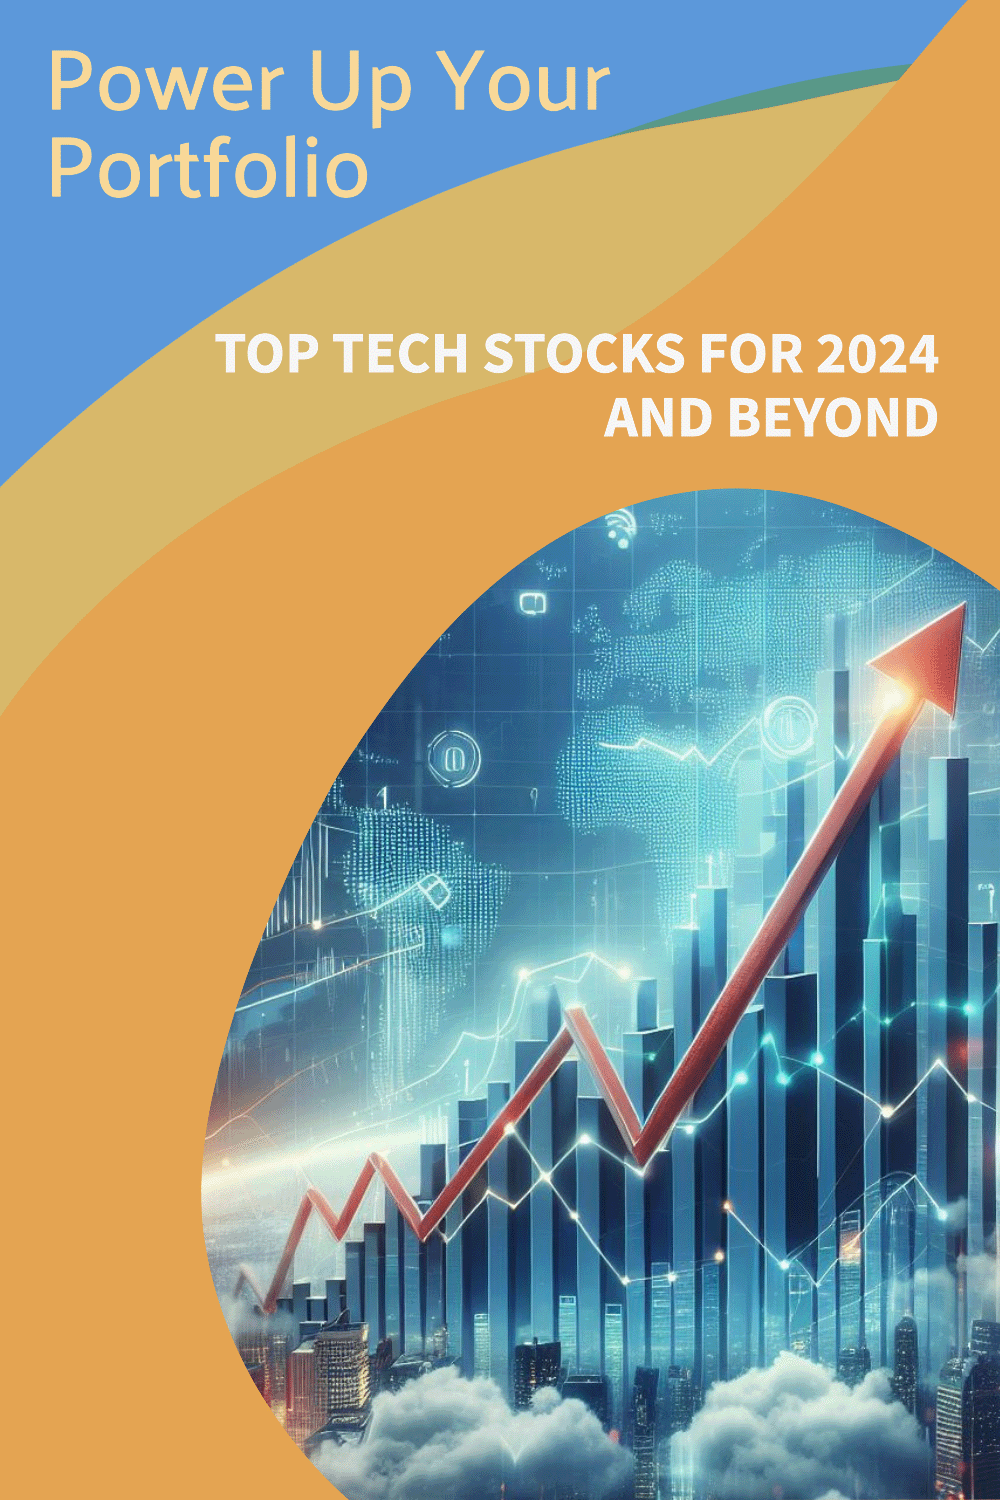 Powering your portfolio: Top tech stocks for 2024 and beyond